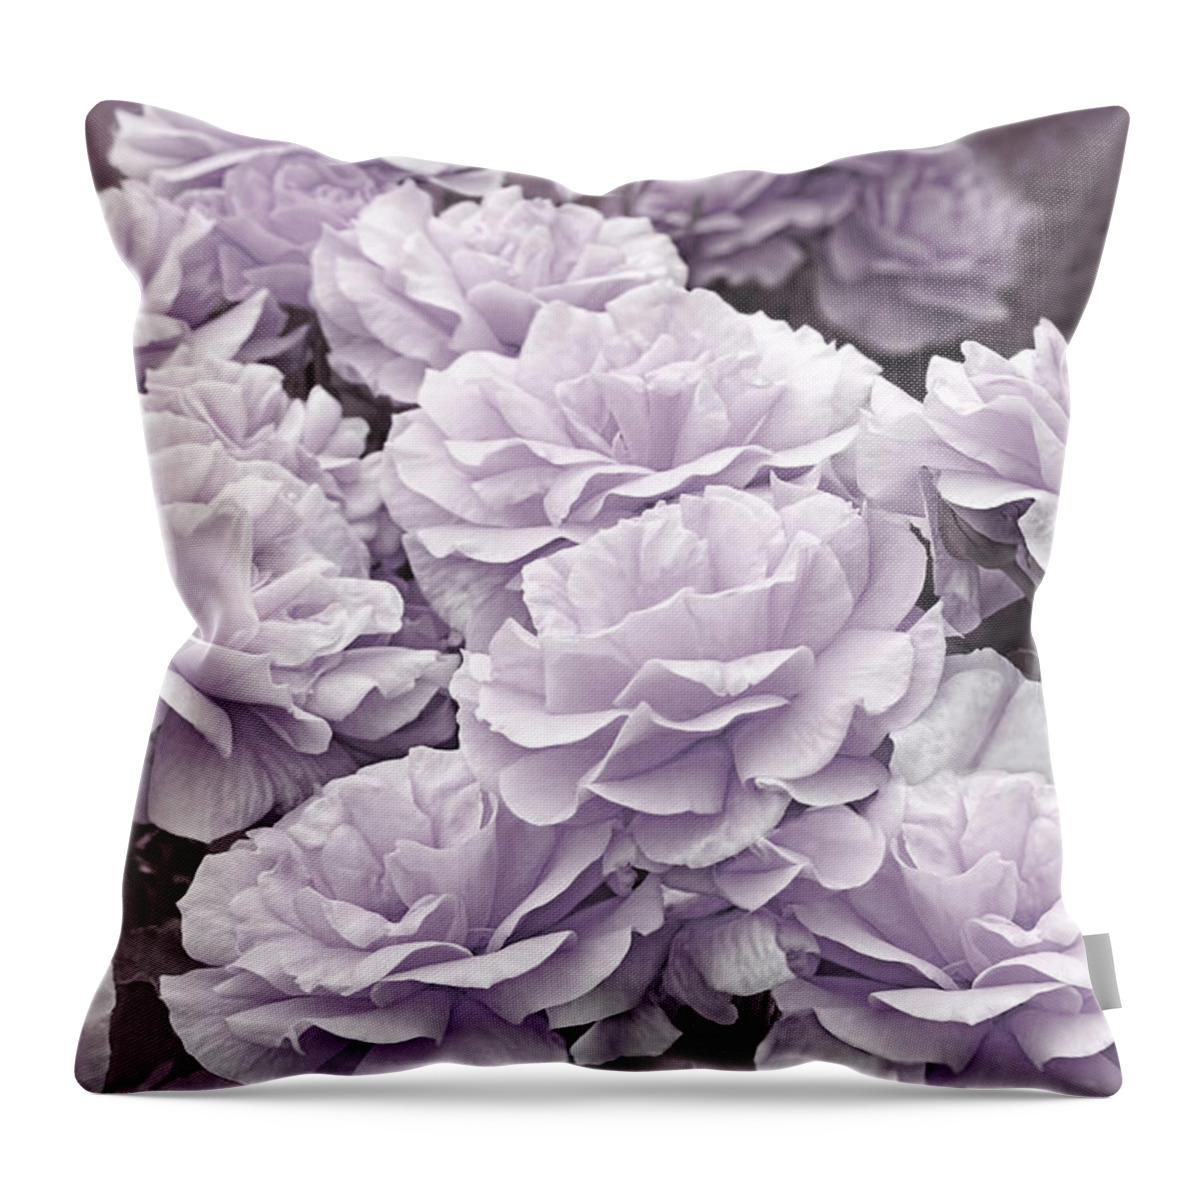 Rose Throw Pillow featuring the photograph The Queen's Lavender Rose Garden by Jennie Marie Schell